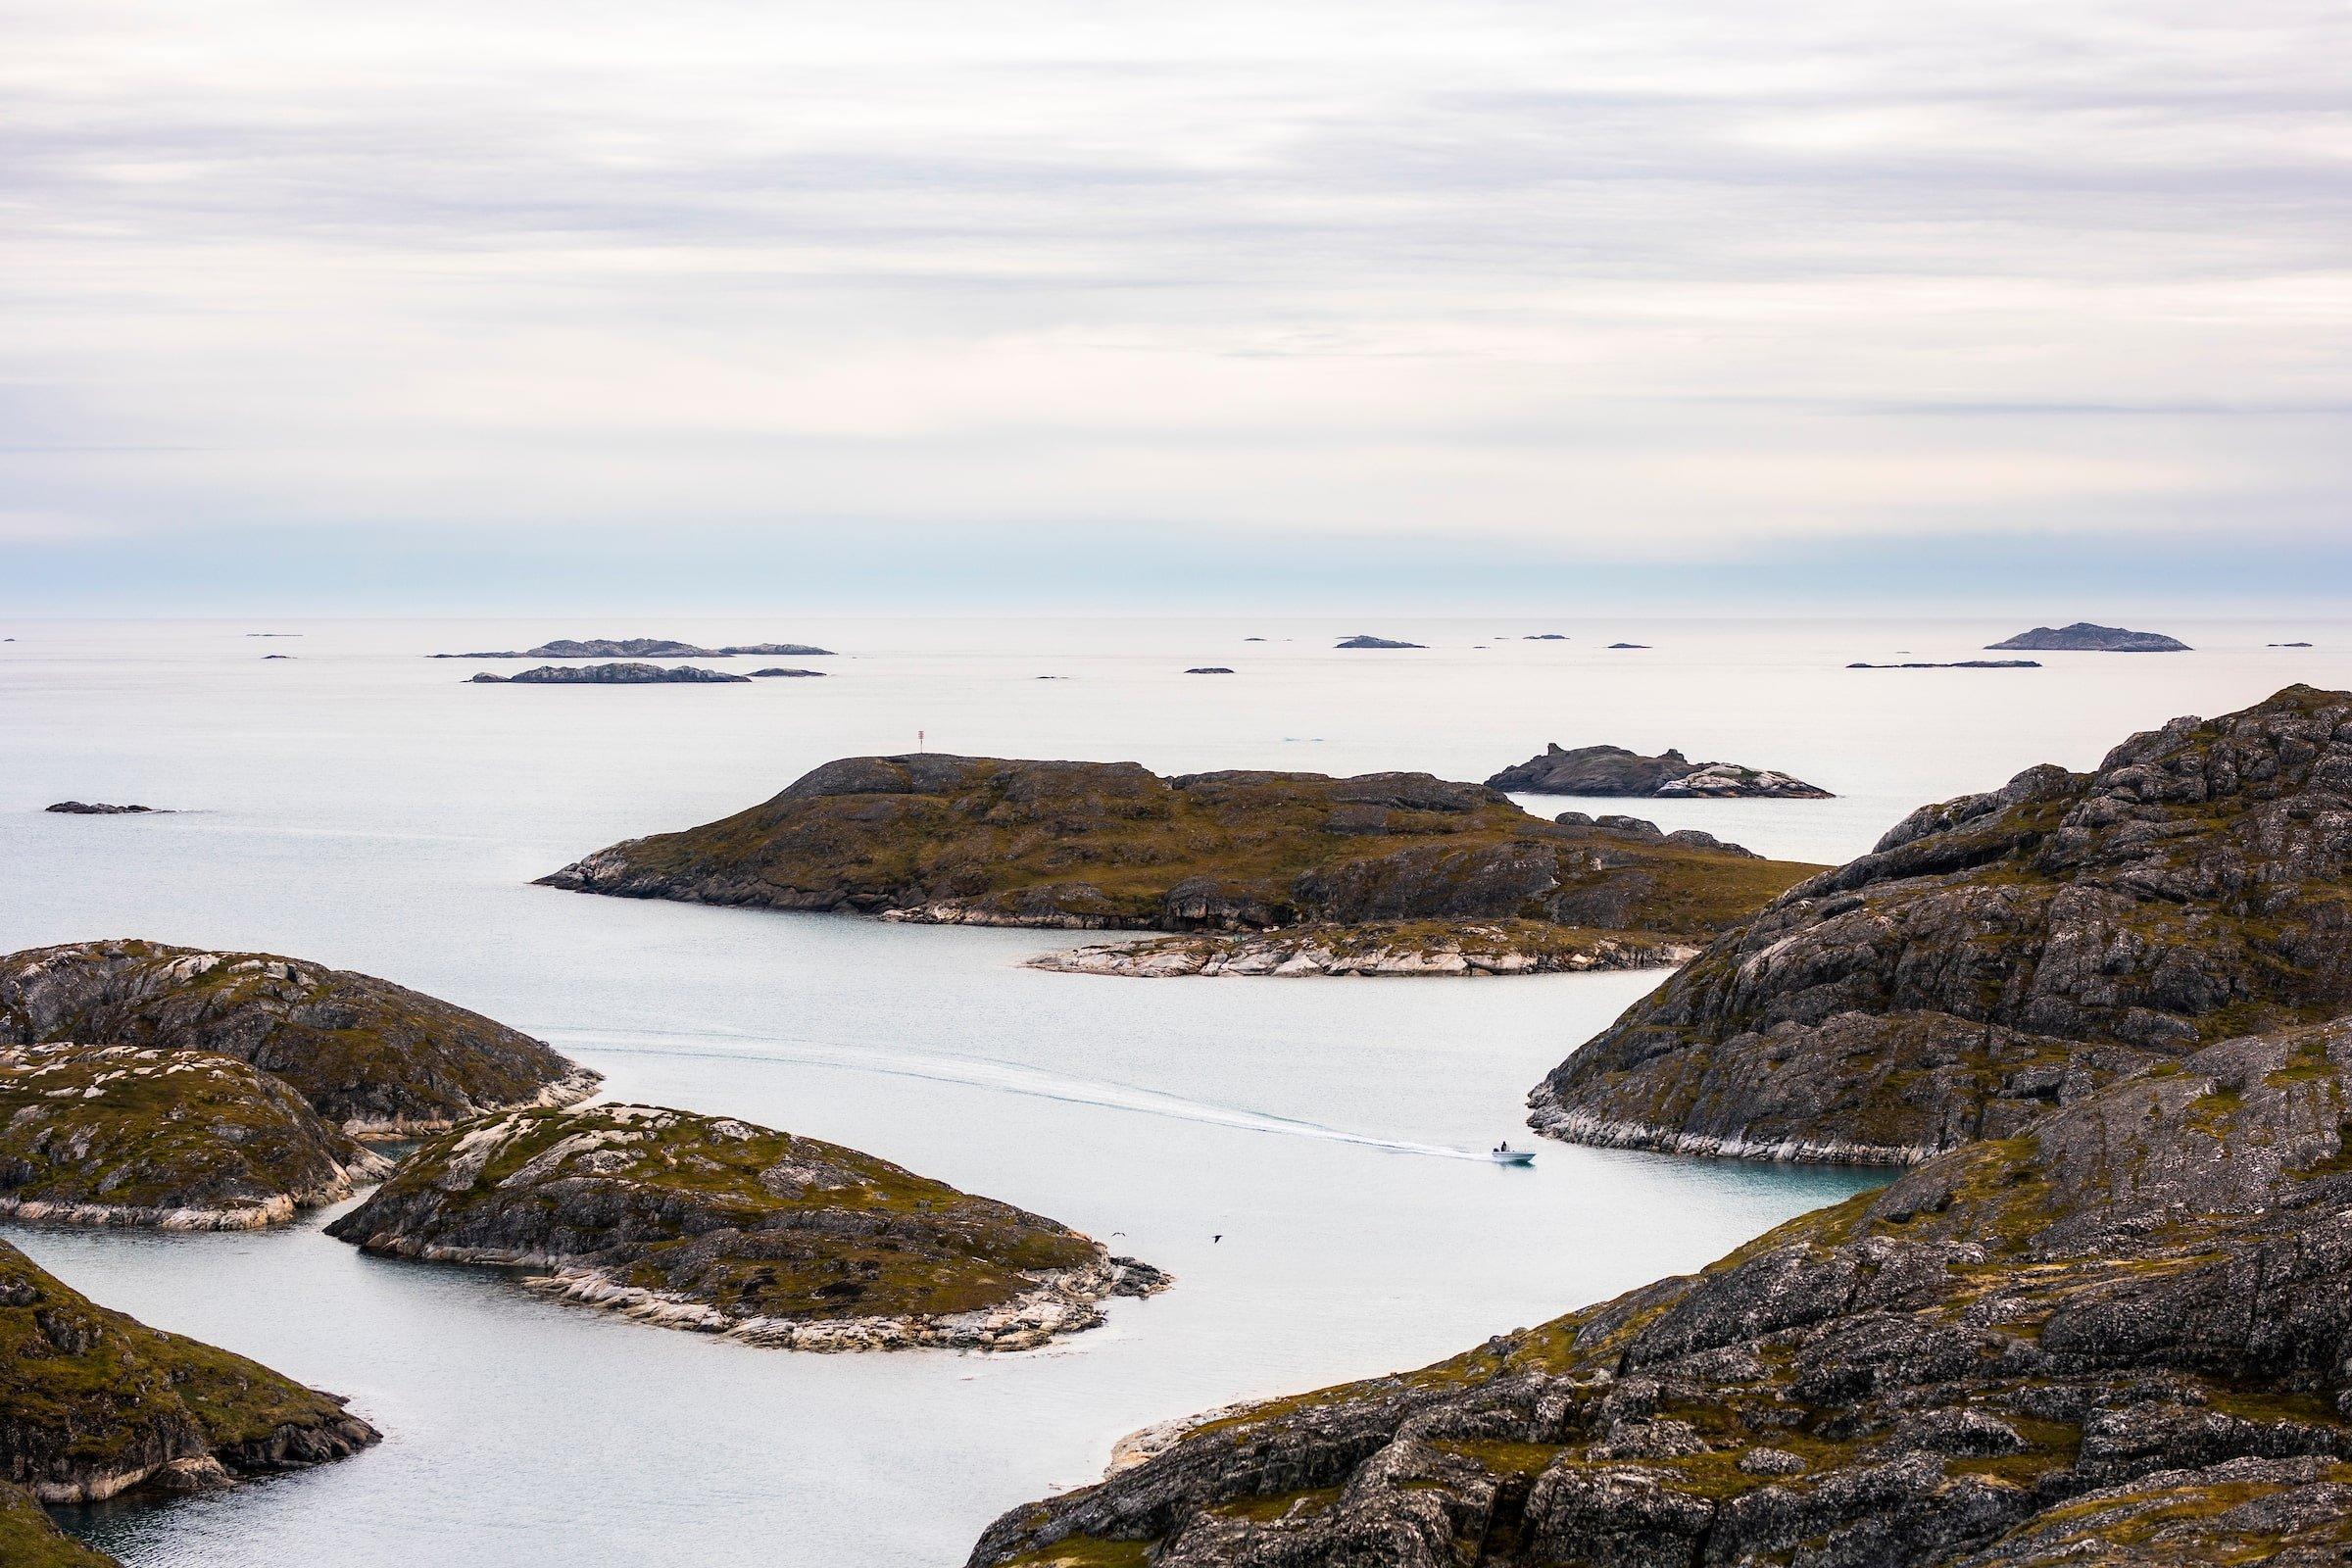 Dinghy sails next to the islands of Paamiut. Photo - Aningaaq R. Carlsen, Visit Greenland